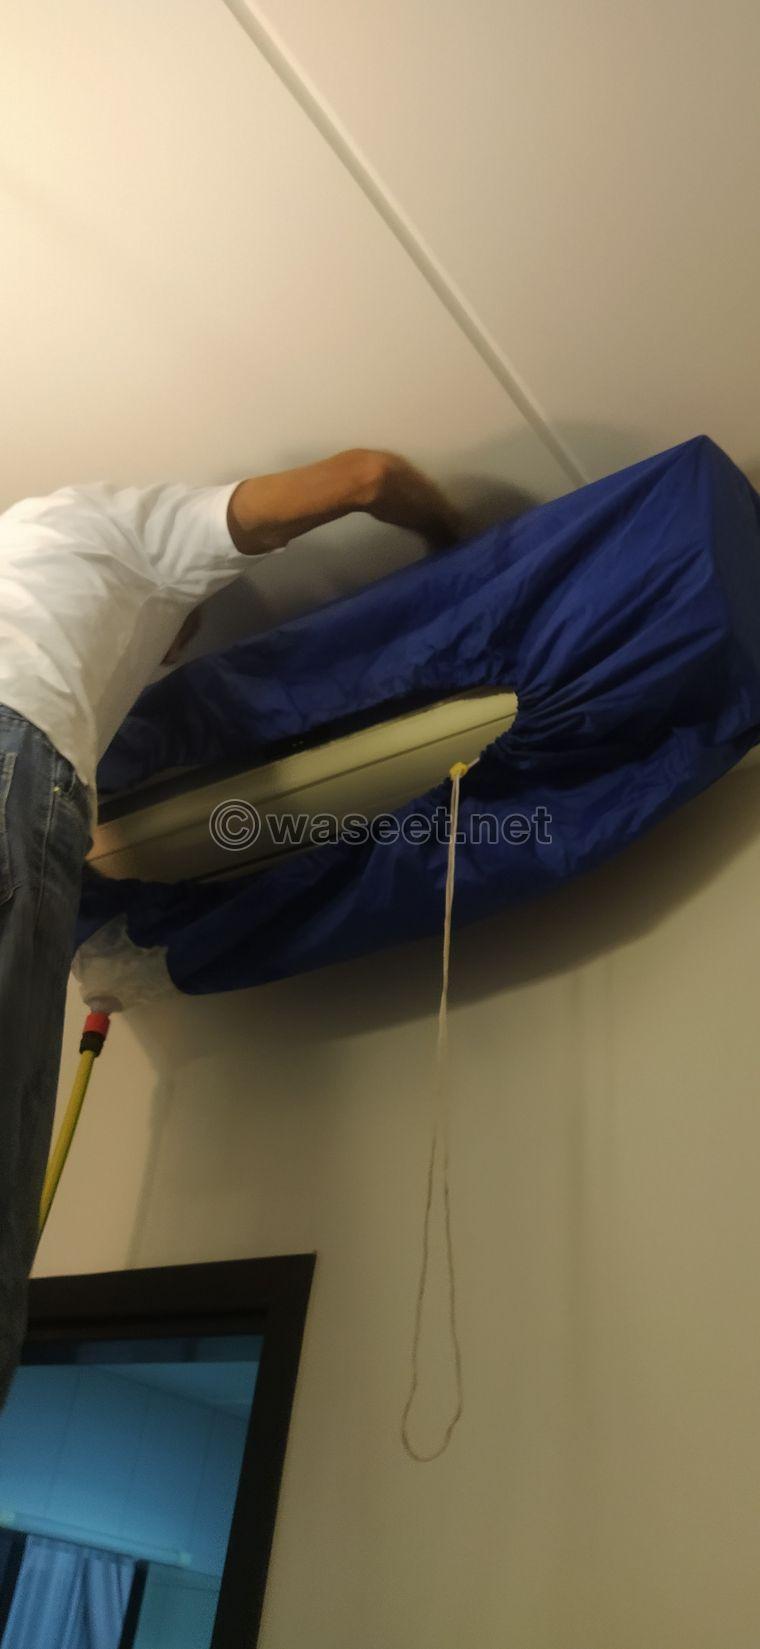  Maintenance, installation and cleaning of all types of air conditioners  4